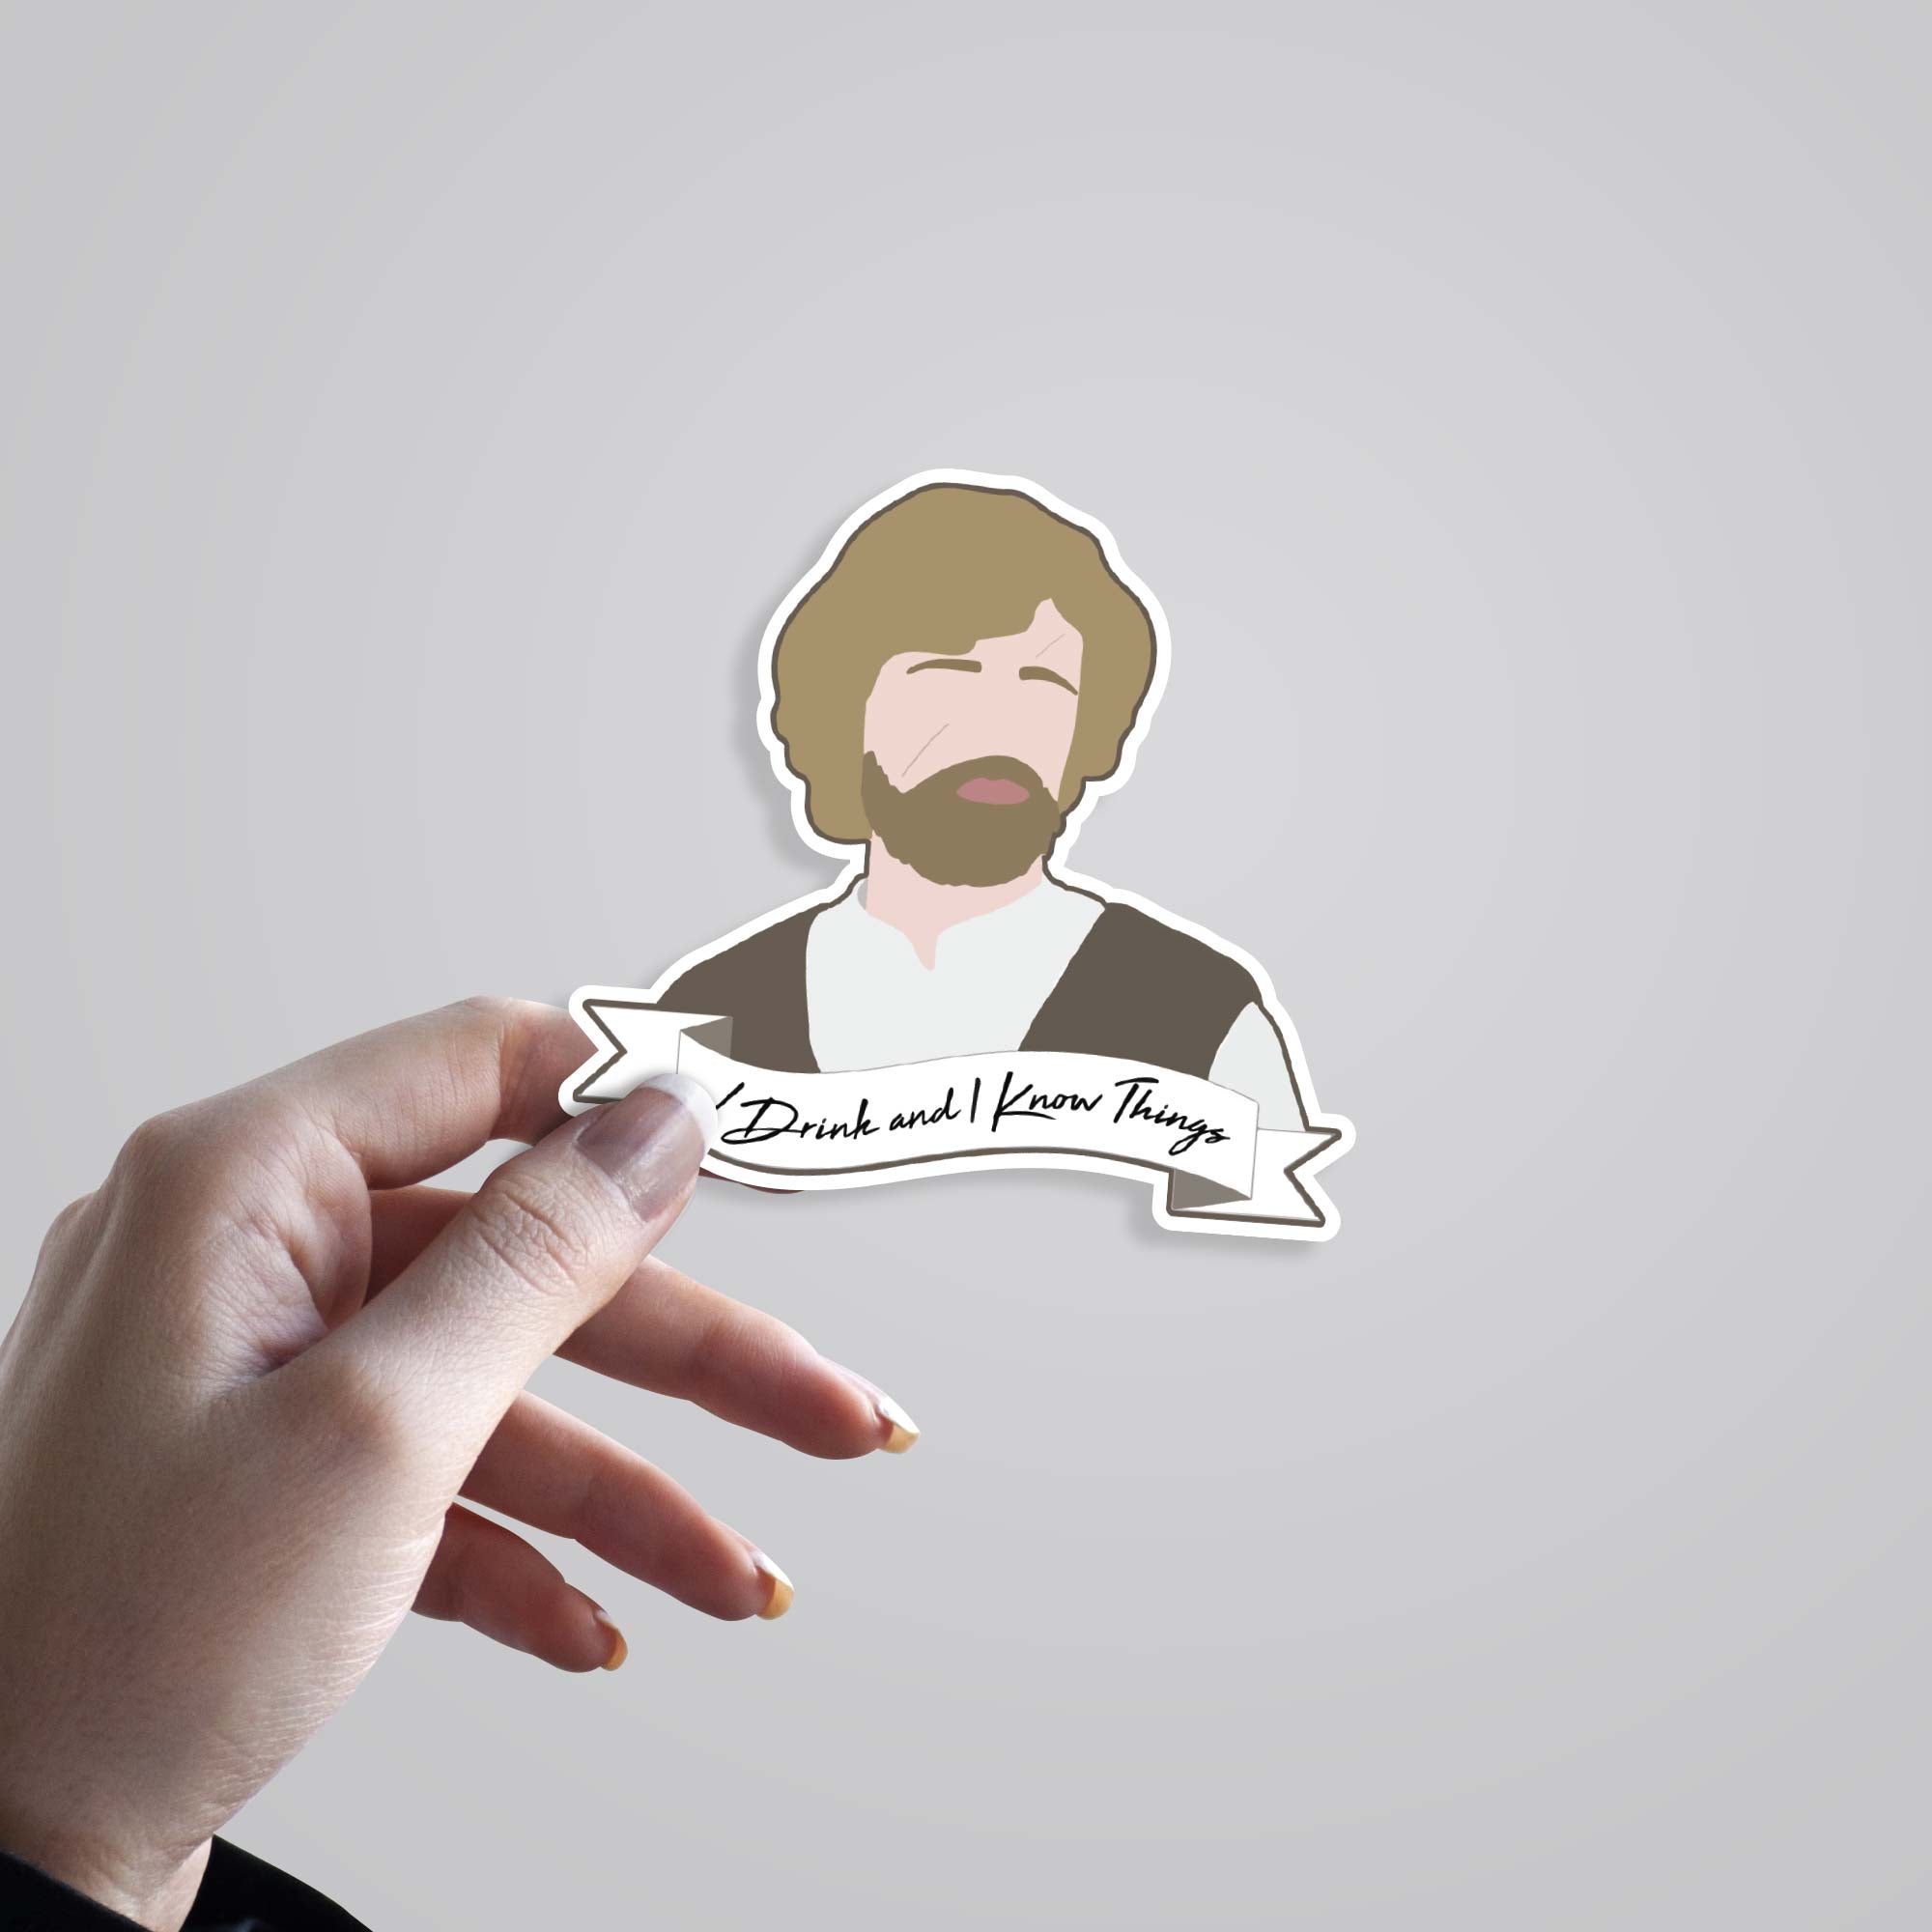 Tyrion I Drink and I Know Things TV Shows Stickers